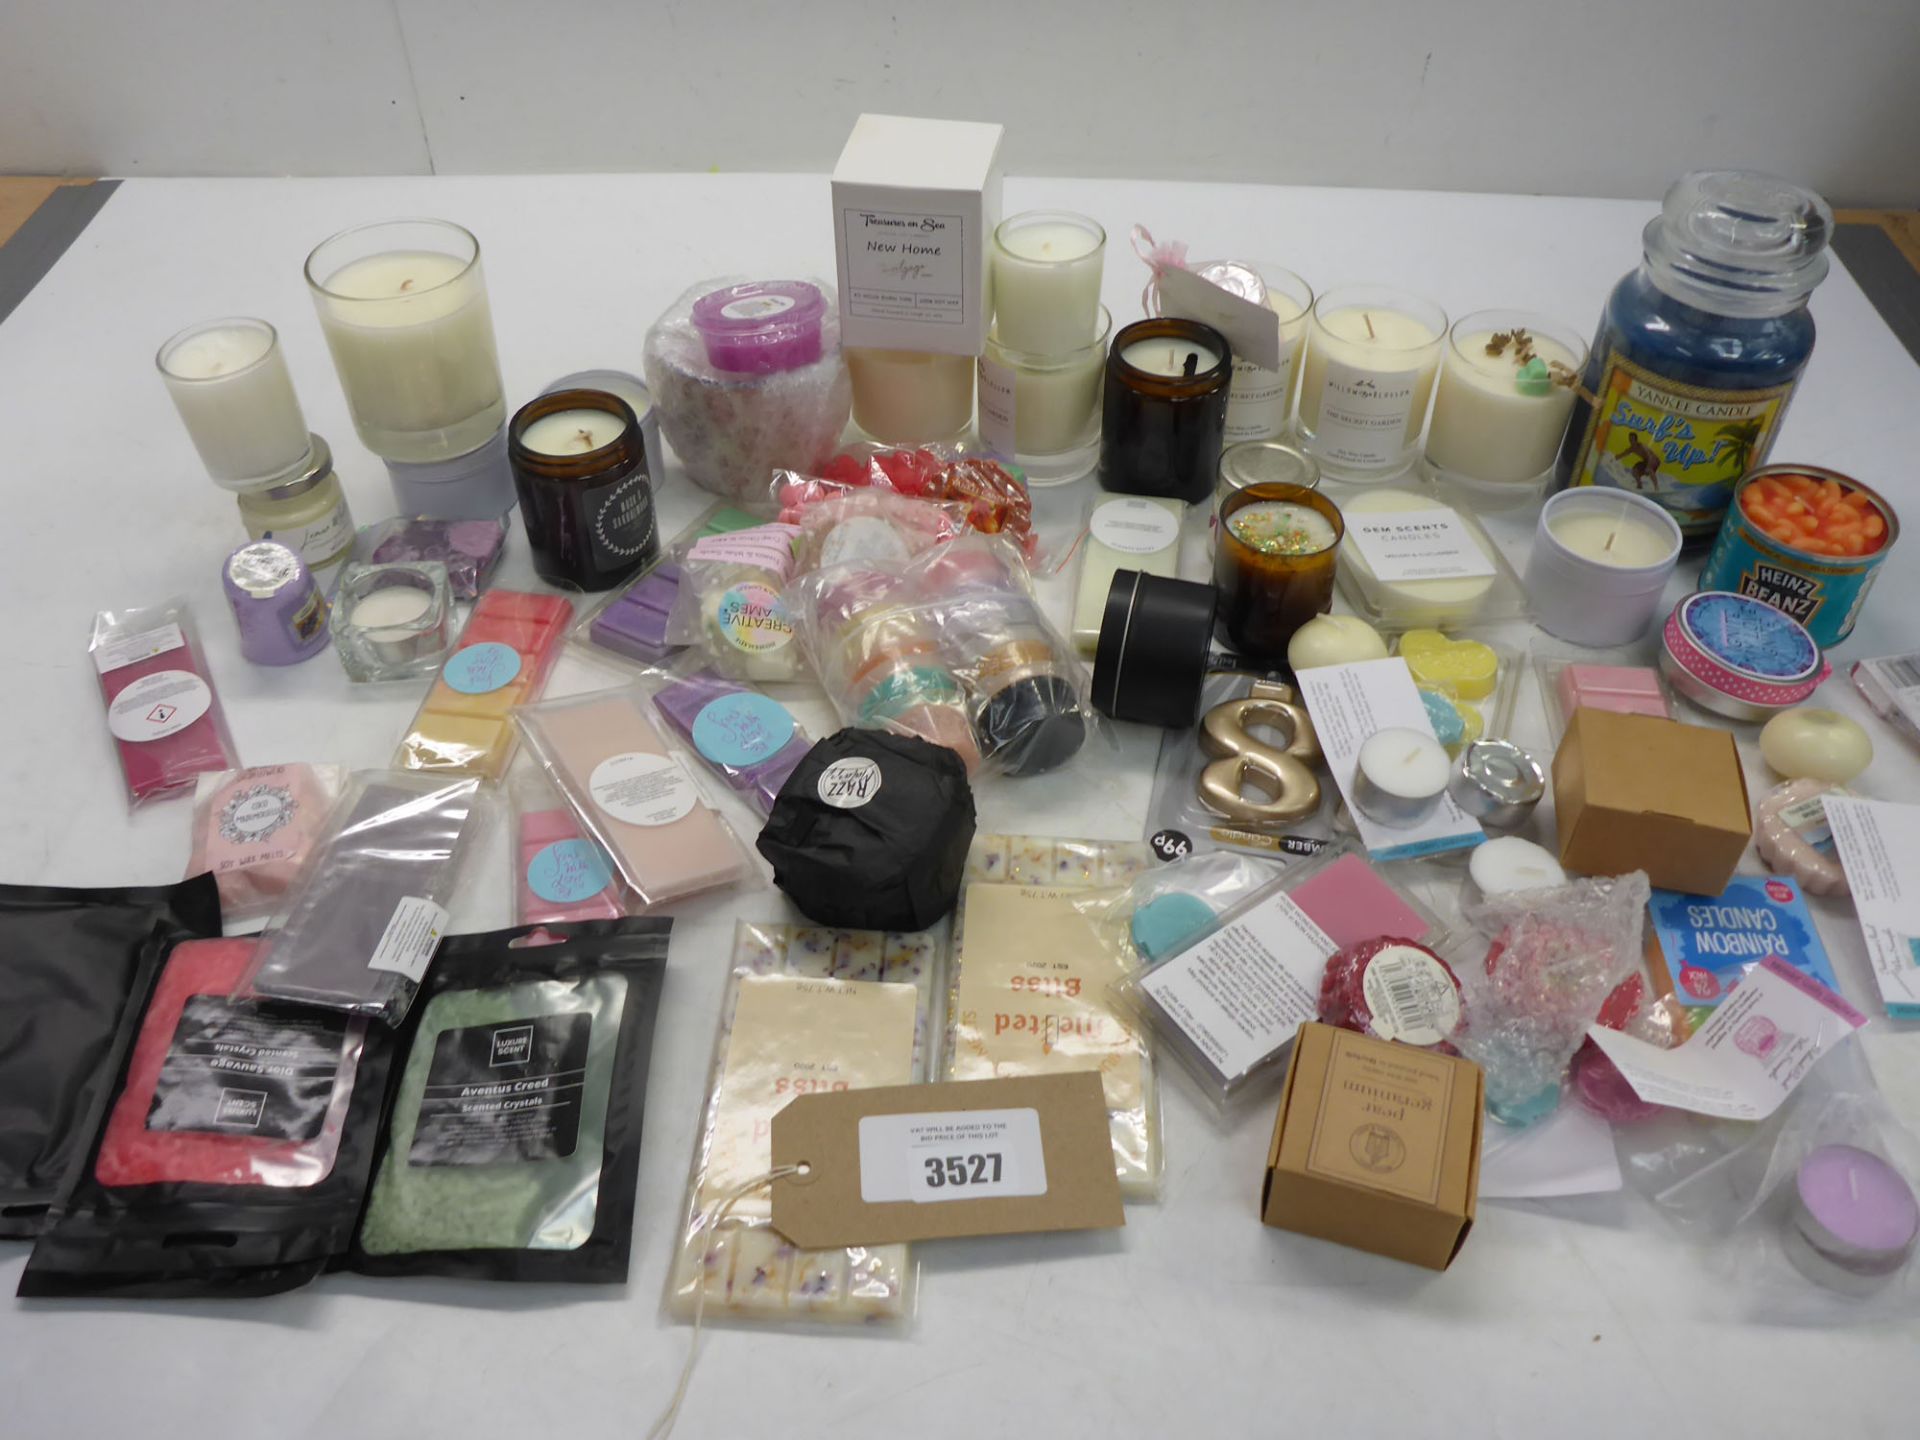 Scented crystals, candles, wax melts, tea lights etc